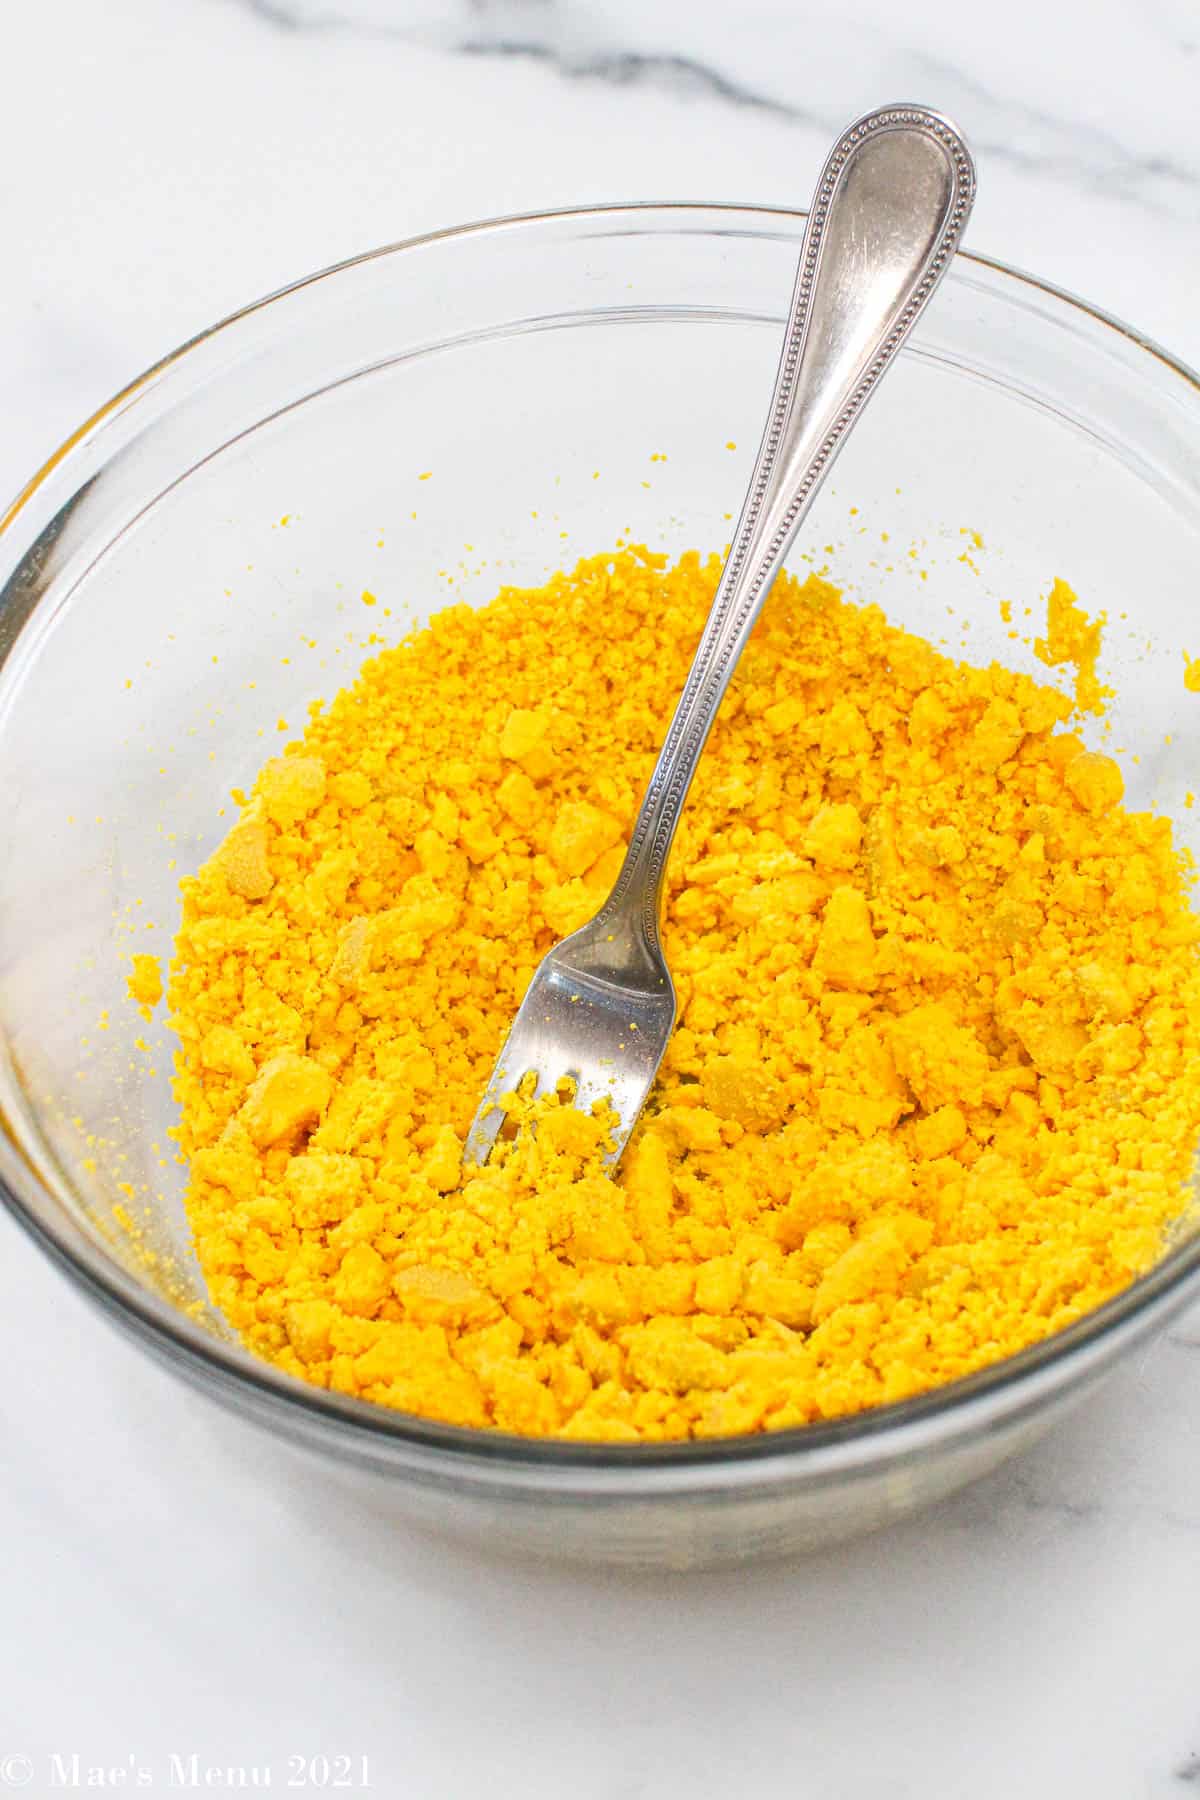 A small mixing bowl of crumbled egg yolk